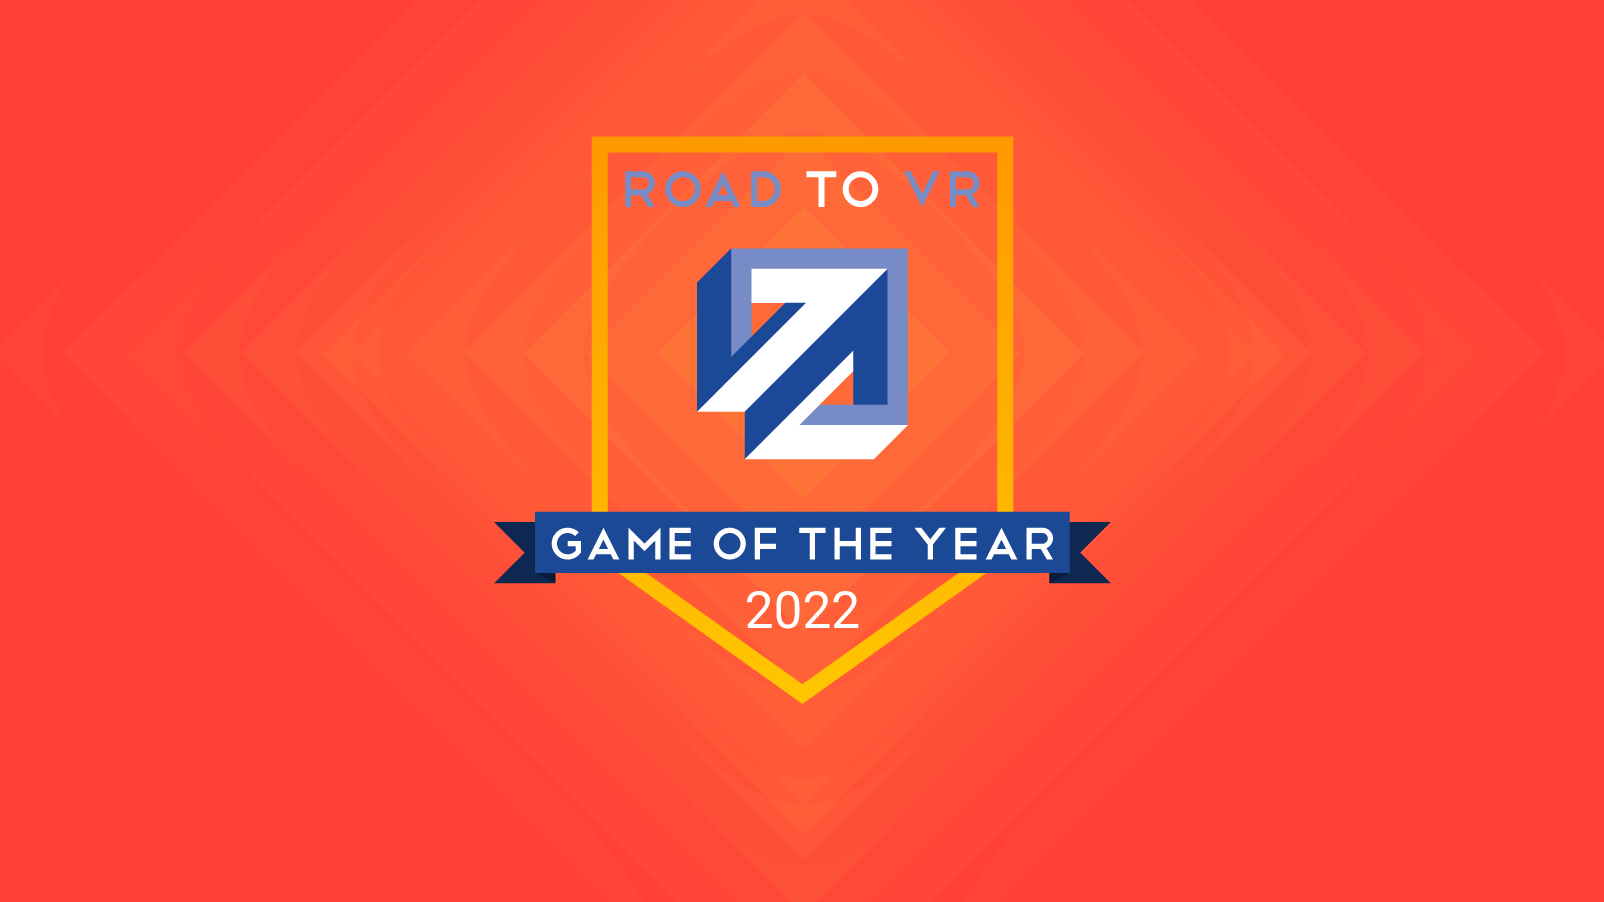 Road to VR’s 2023 Game of the Year Awards – Road to VR